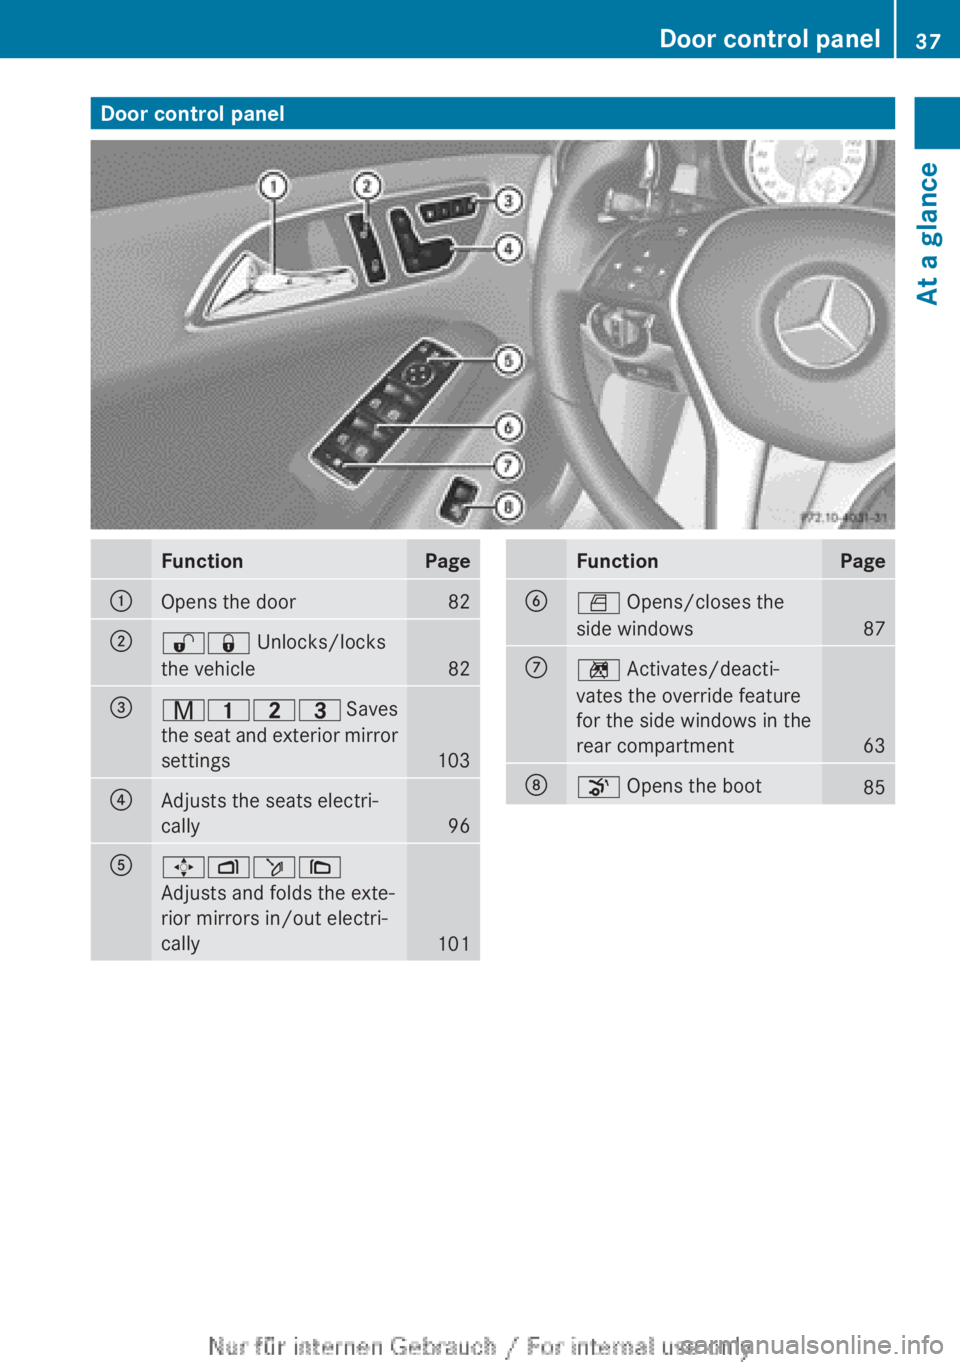 MERCEDES-BENZ CLA 2013 Owners Guide Door control panelFunctionPage:Opens the door82;%& Unlocks/locks
the vehicle
82
=r 45=  Saves
the seat and exterior mirror
settings
103
?Adjusts the seats electri-
cally
96
A7 Zö\
Adjusts and folds t